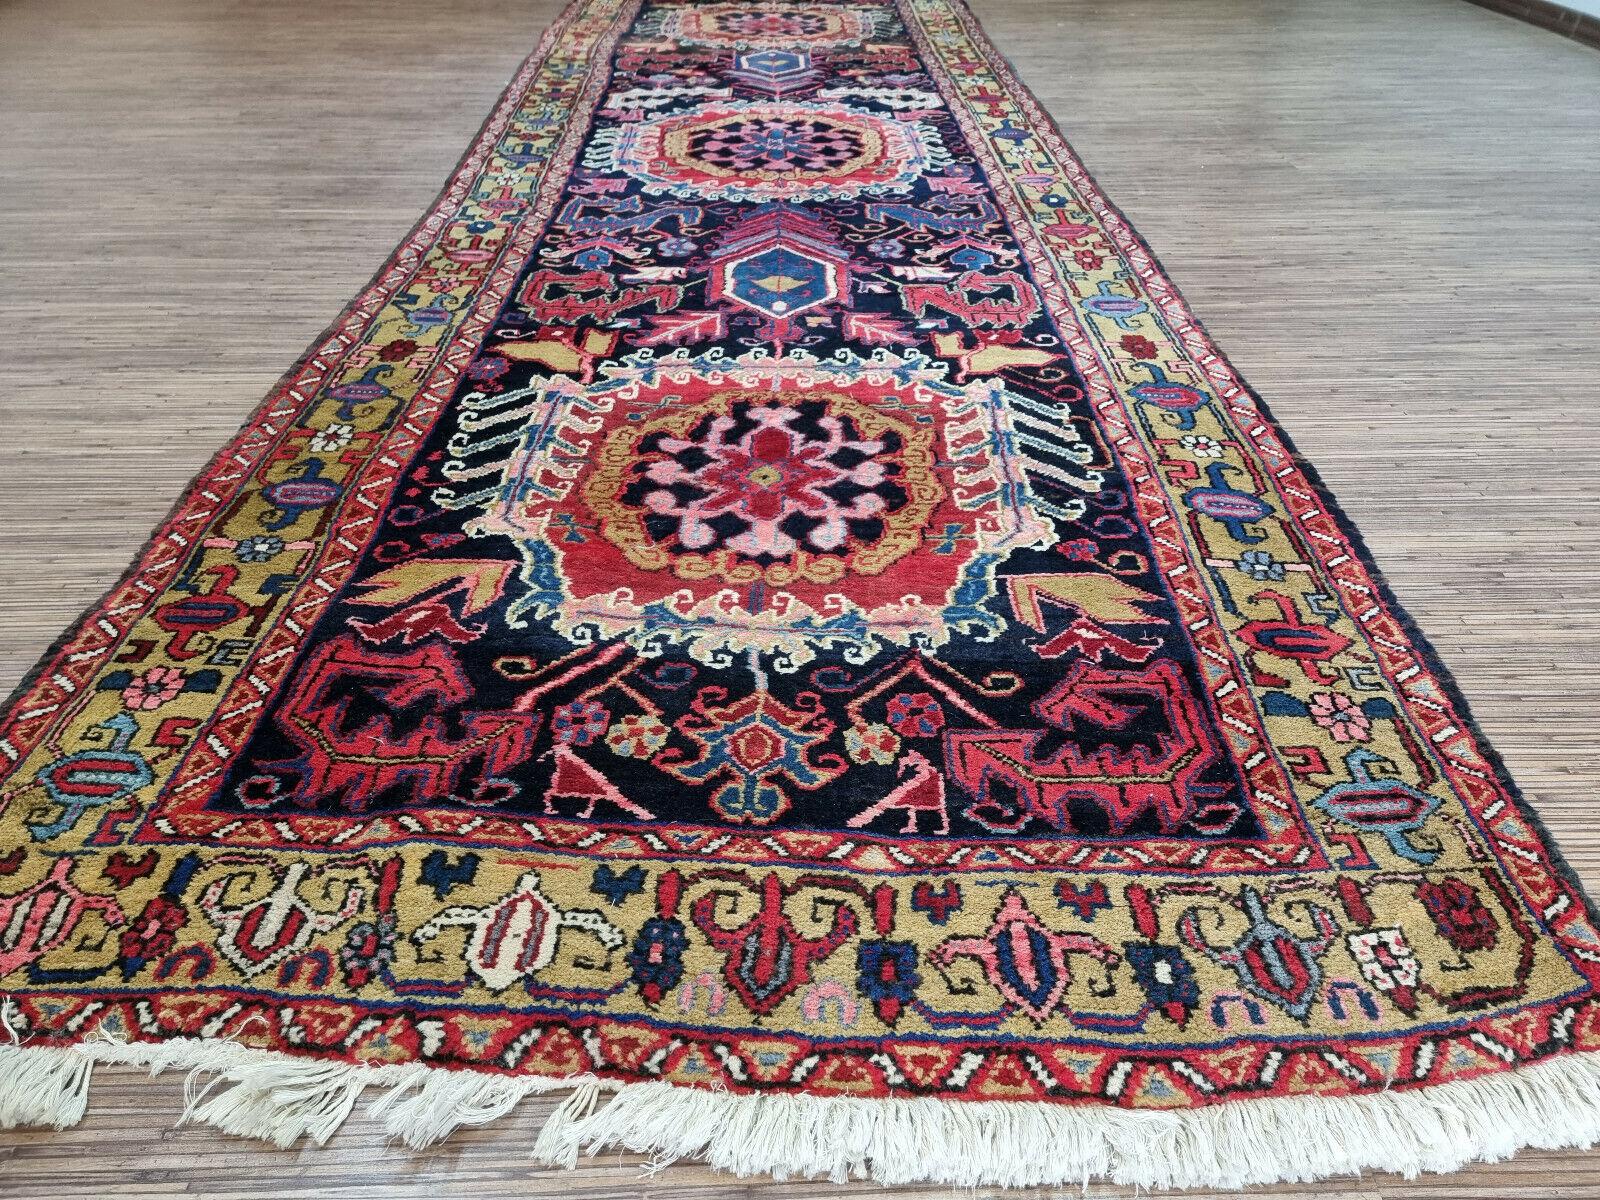 Hand-Knotted Handmade Antique Persian Style Heriz Runner Rug 3.7' x 12.1', 1920s - 1D78 For Sale